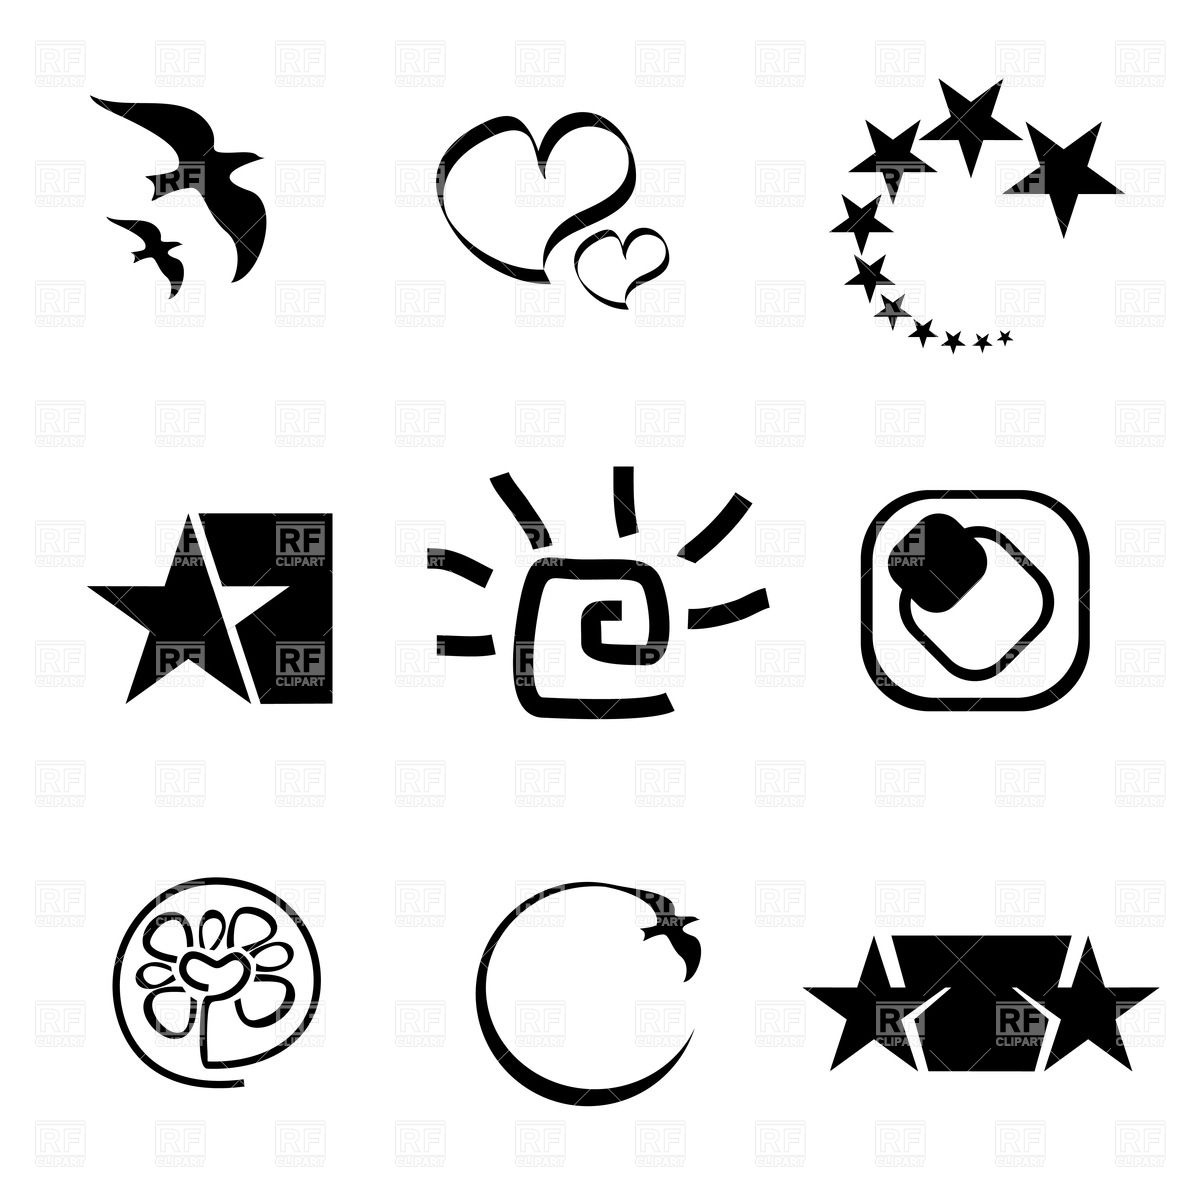     Symbols And Icons 20308 Download Royalty Free Vector Clipart  Eps